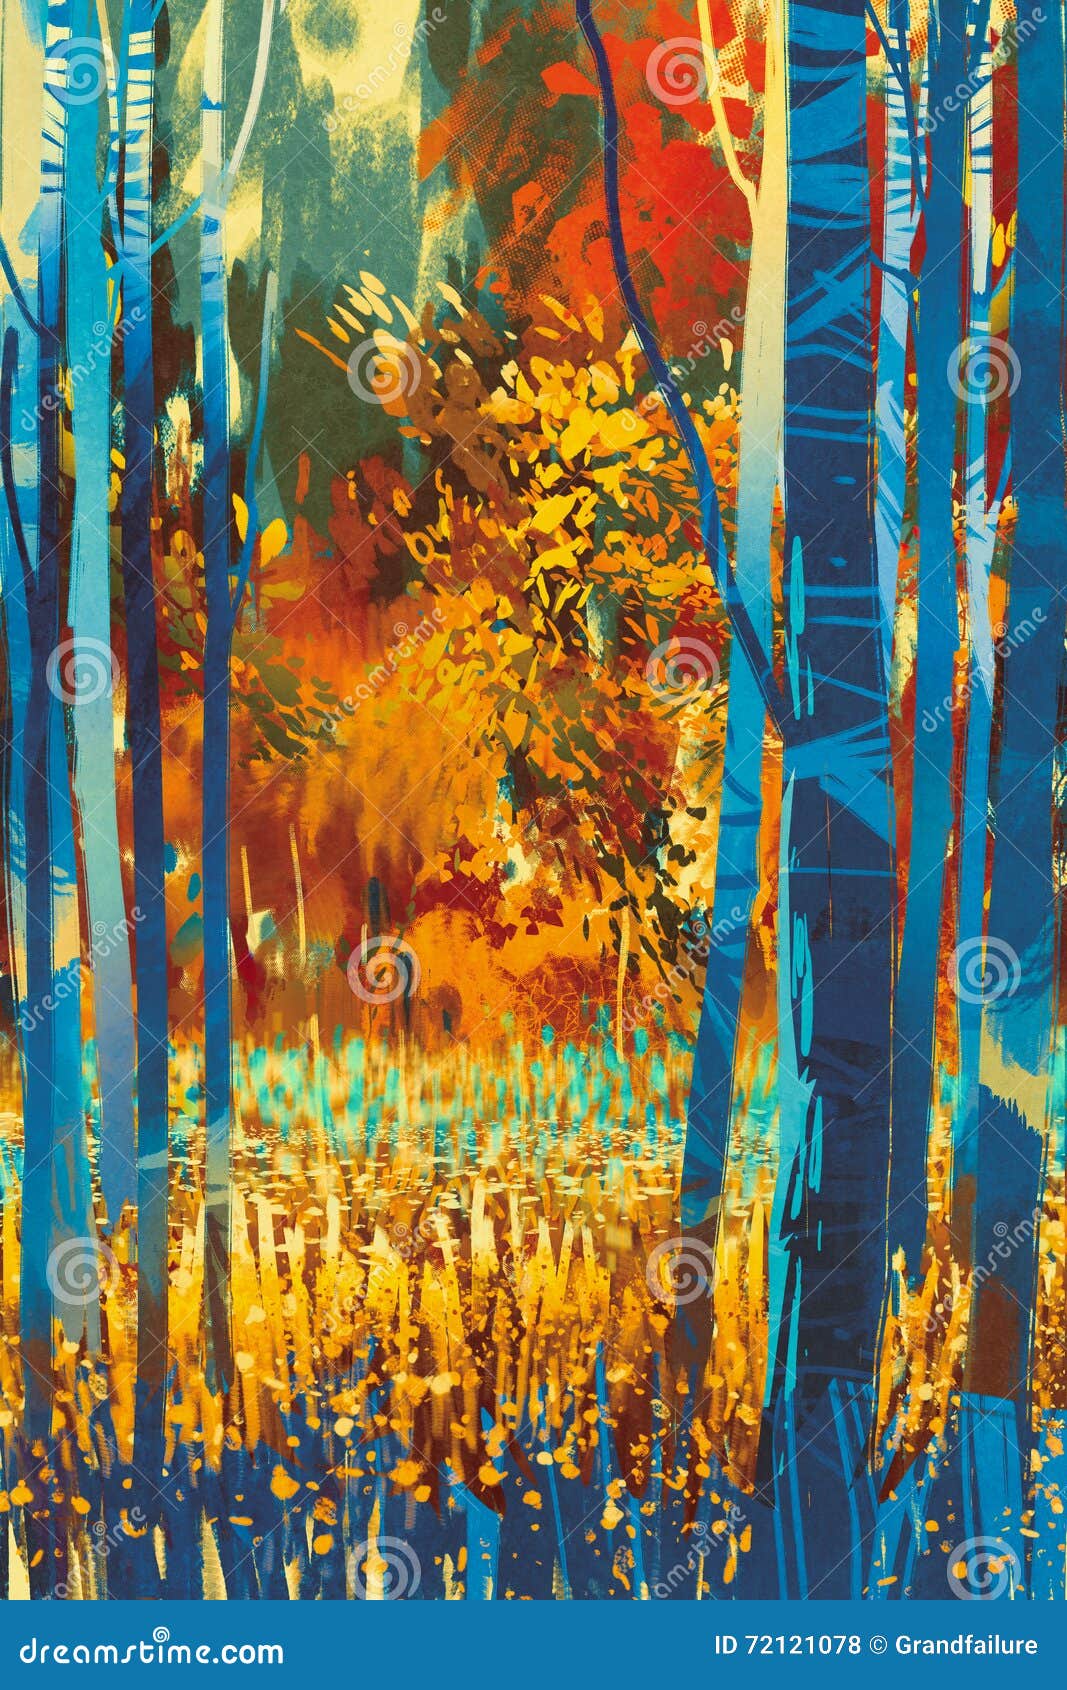 autumn forest with blue trees in the foreground